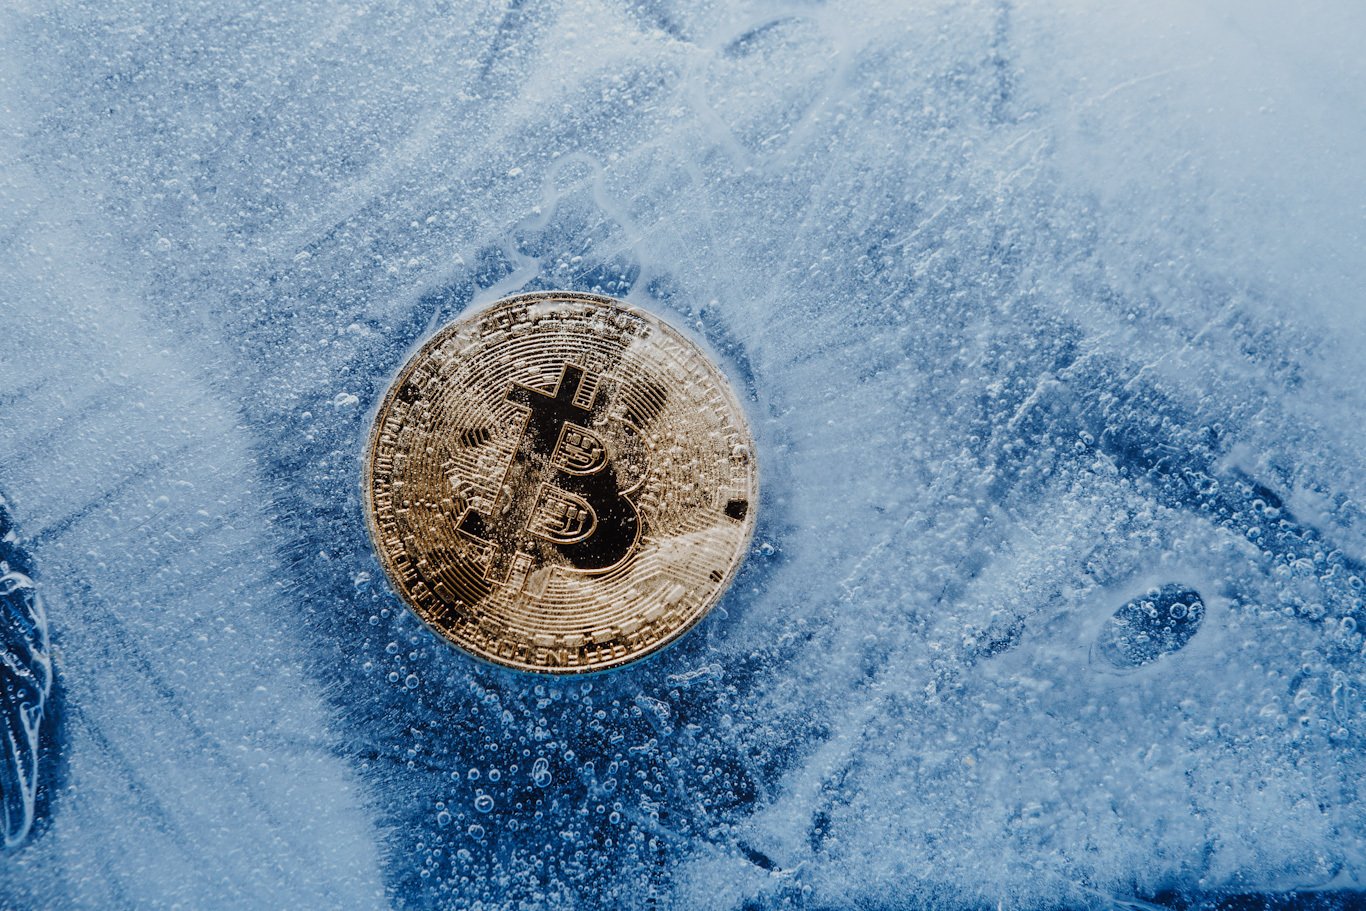 A gold coin with the Bitcoin logo is frozen in ice